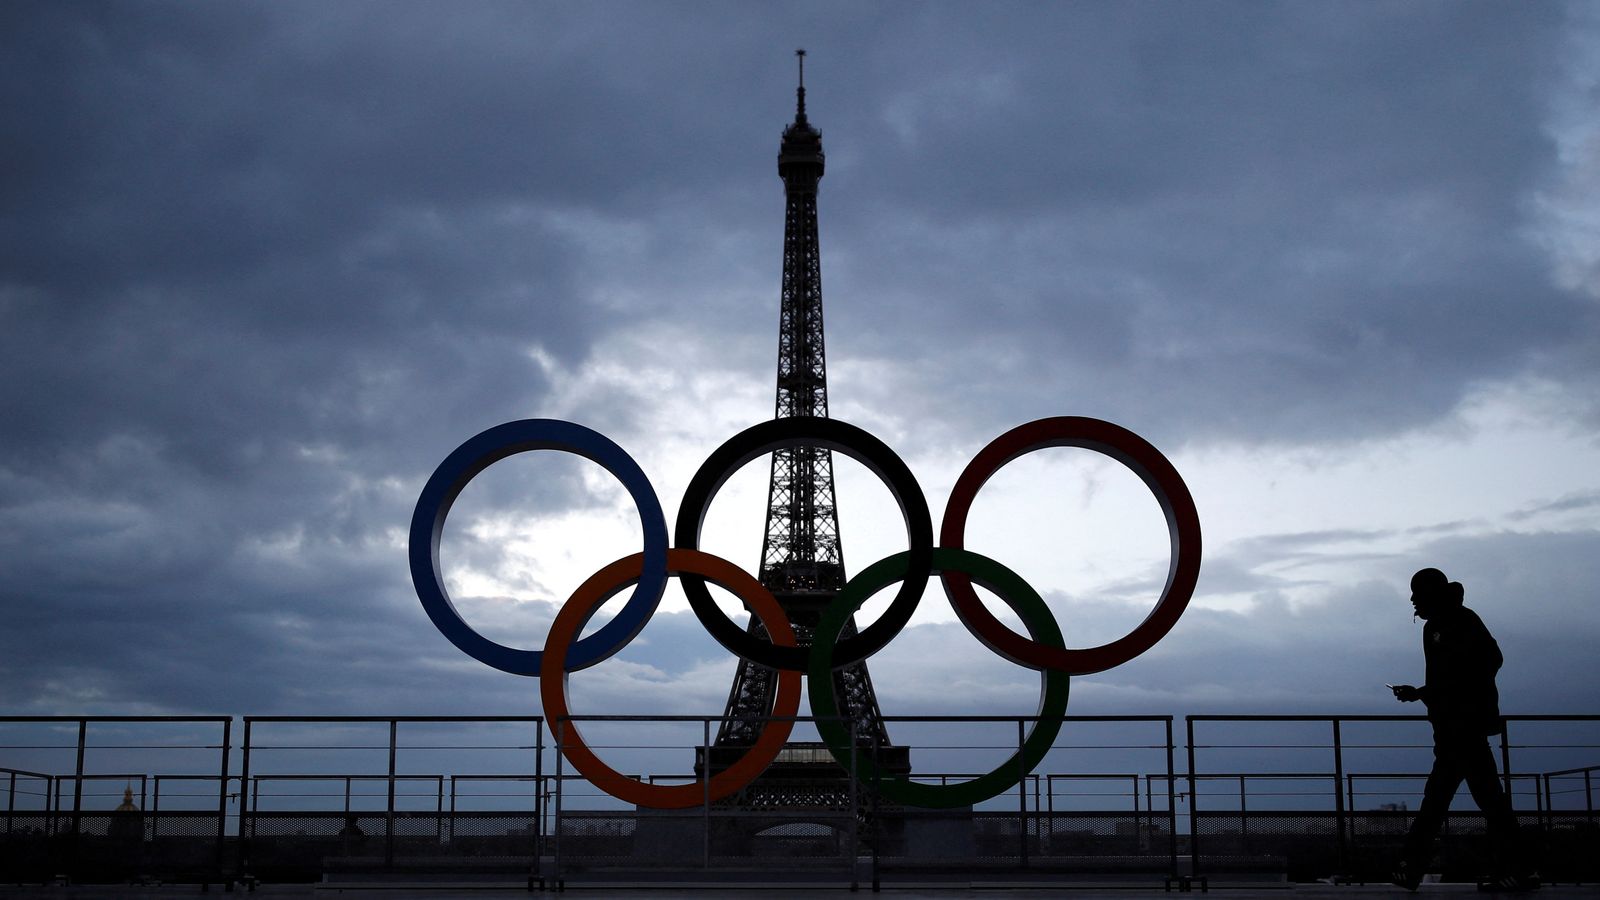 Paris Olympics: 16-year-old arrested after he said he wanted to 'die a martyr' at Games